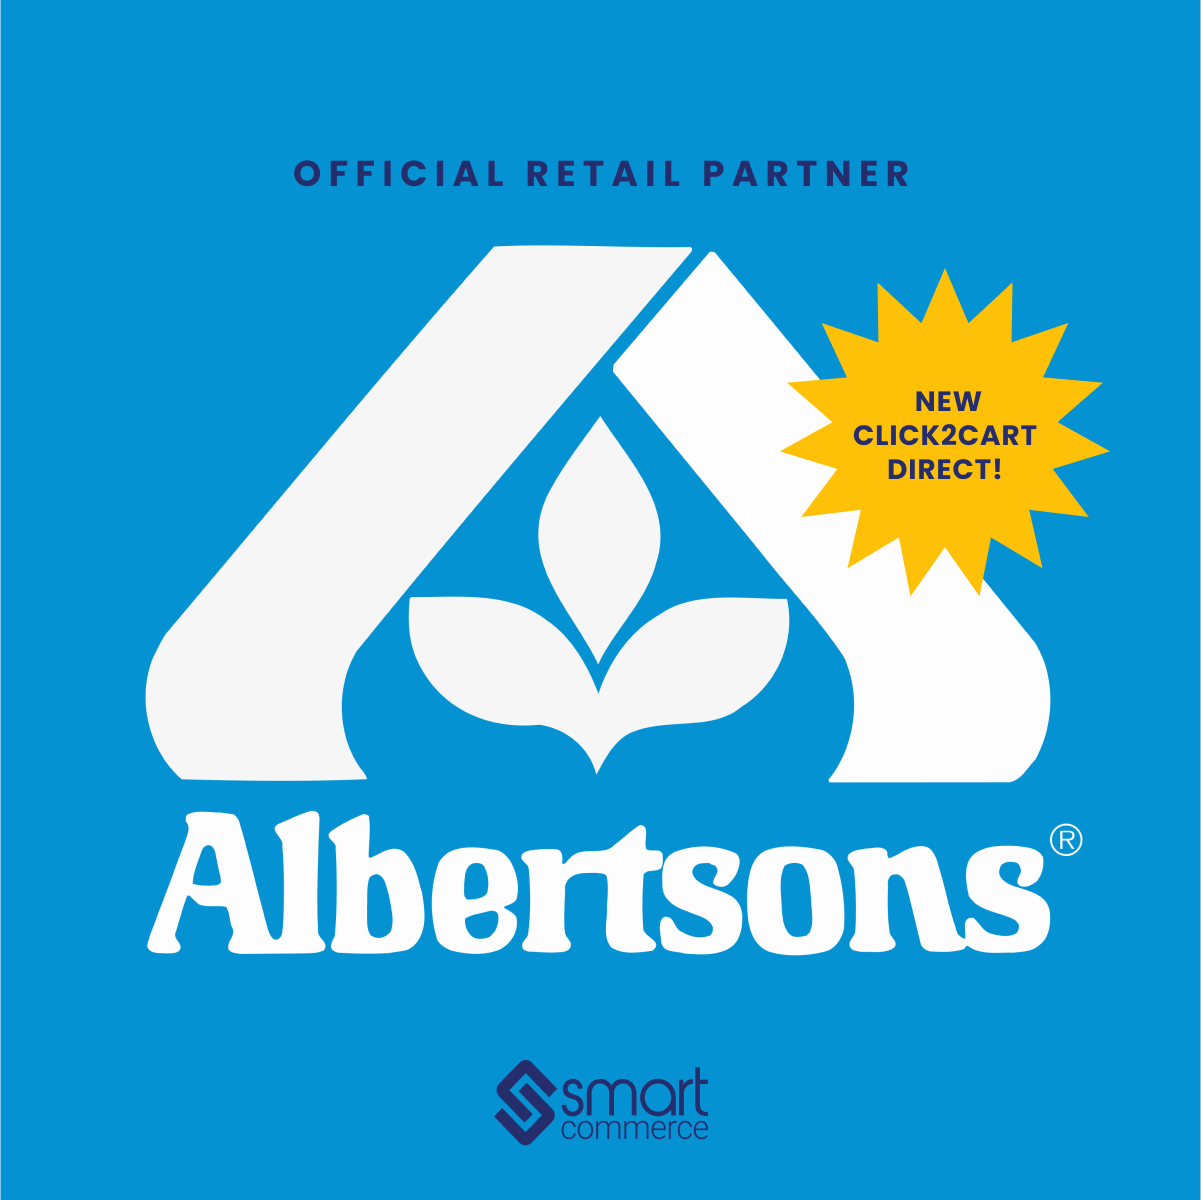 Cover Image for Albertsons Is Now An Official Retail Partner of SmartCommerce